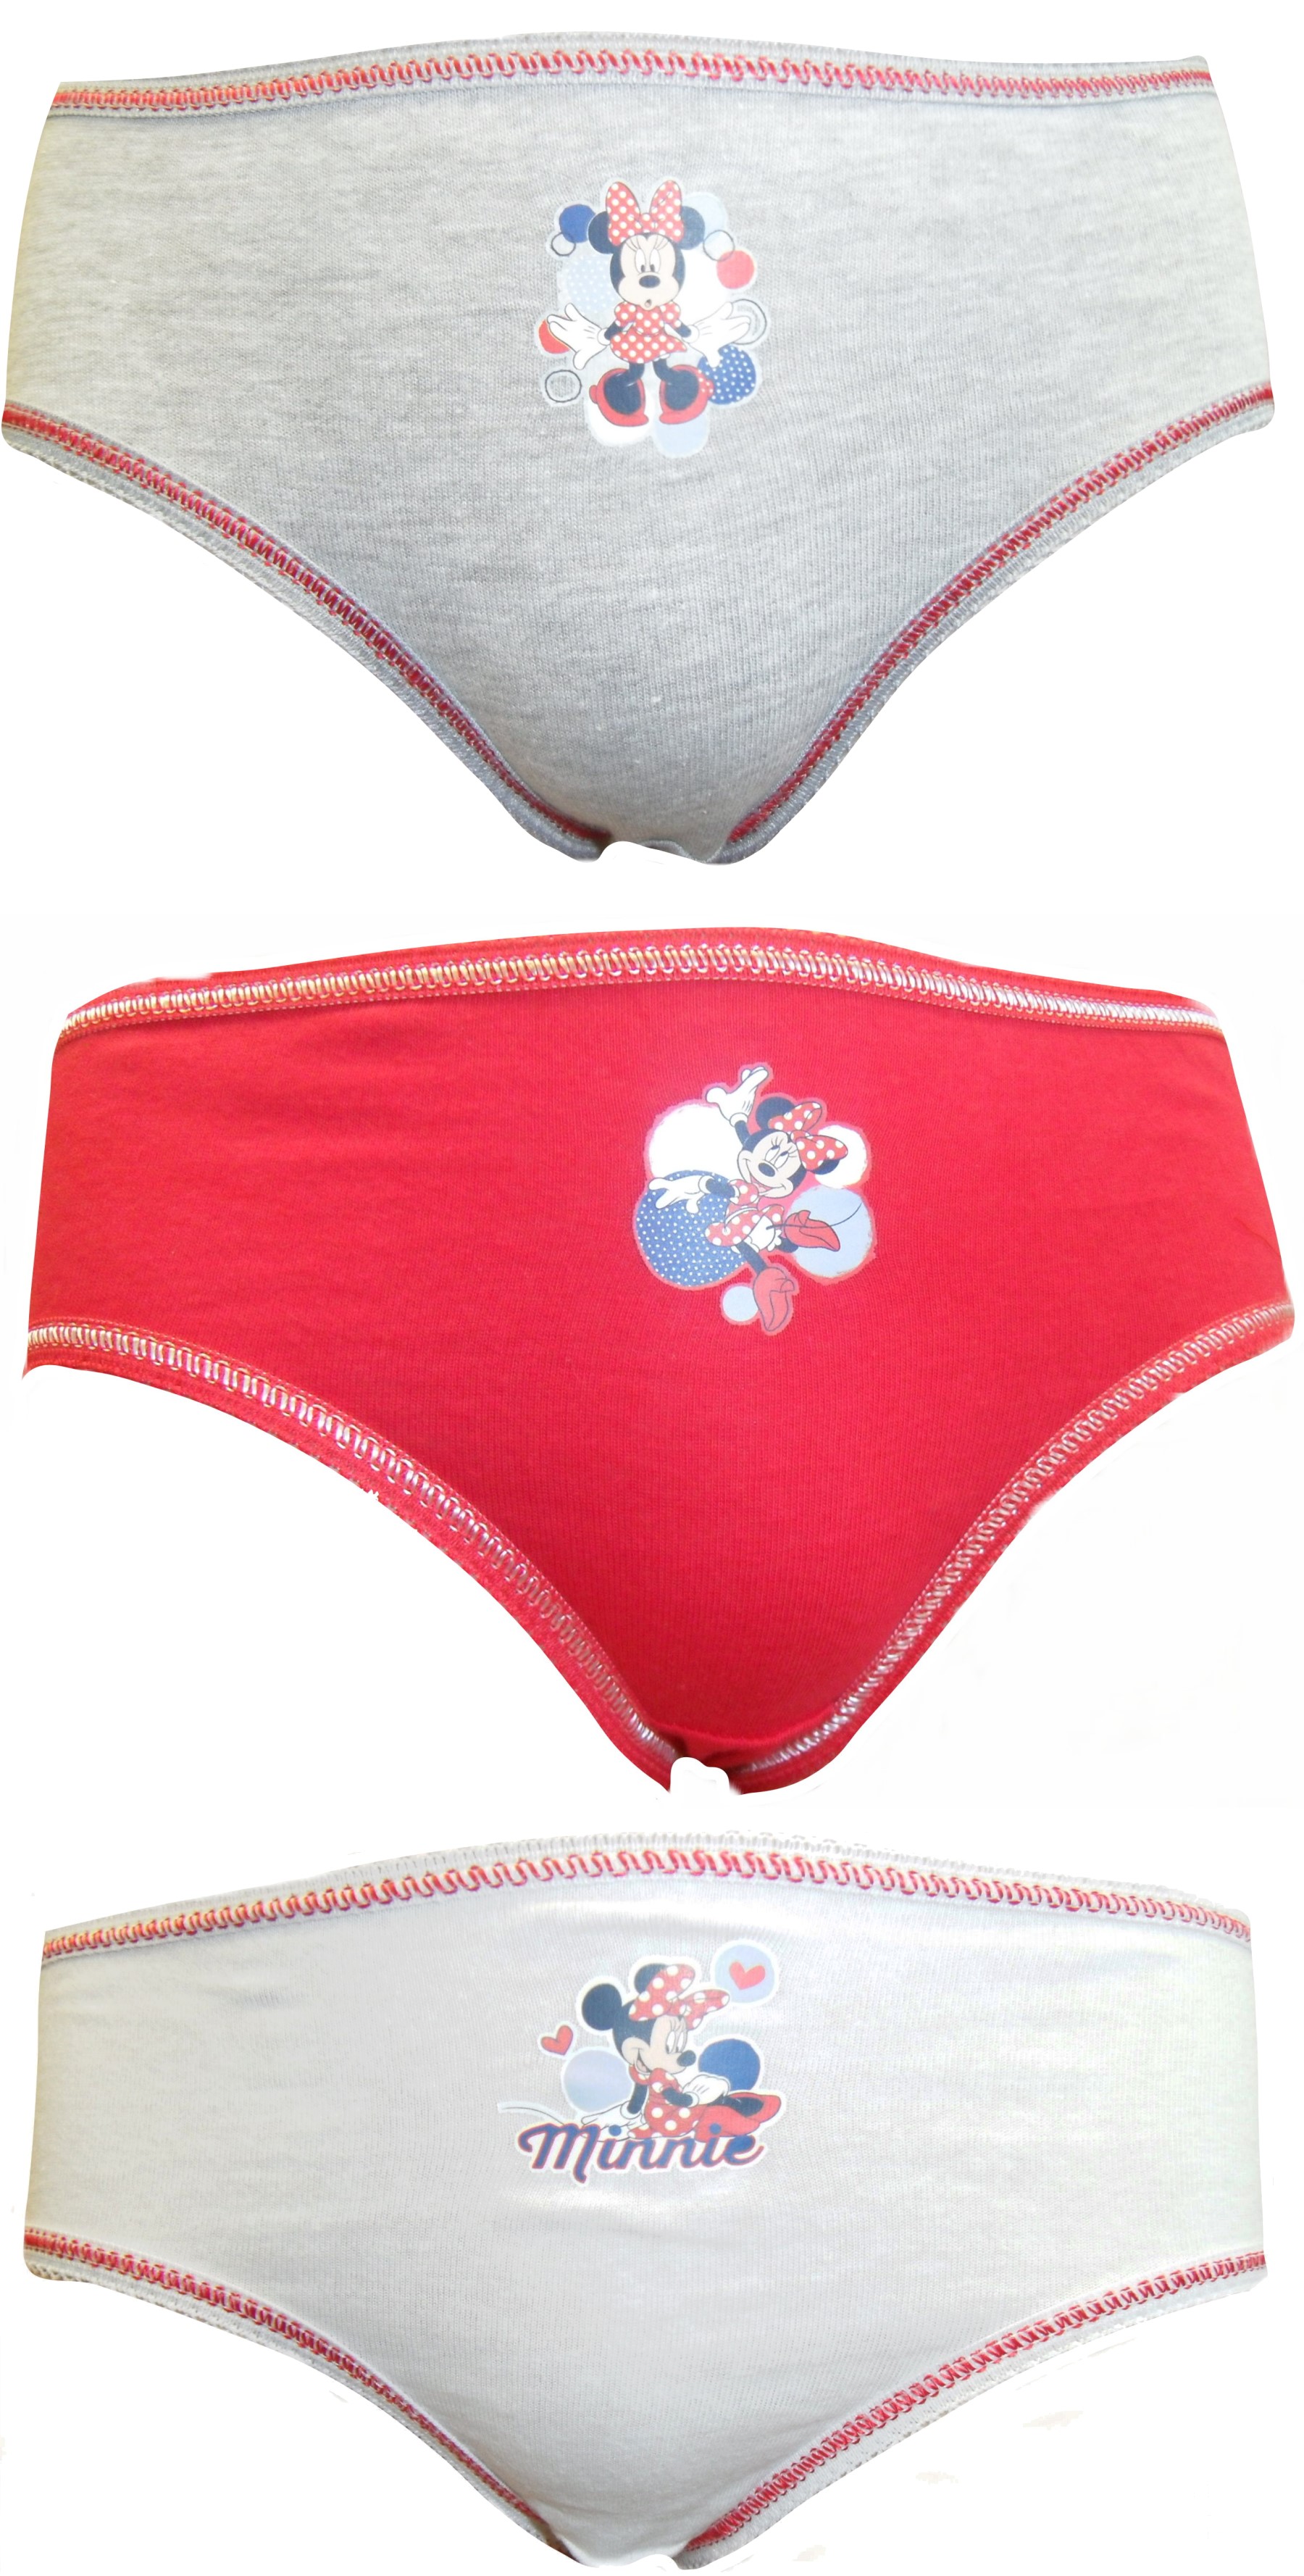 Minnie Mouse Knickers GUW14 .JPG  by Thingimijigs